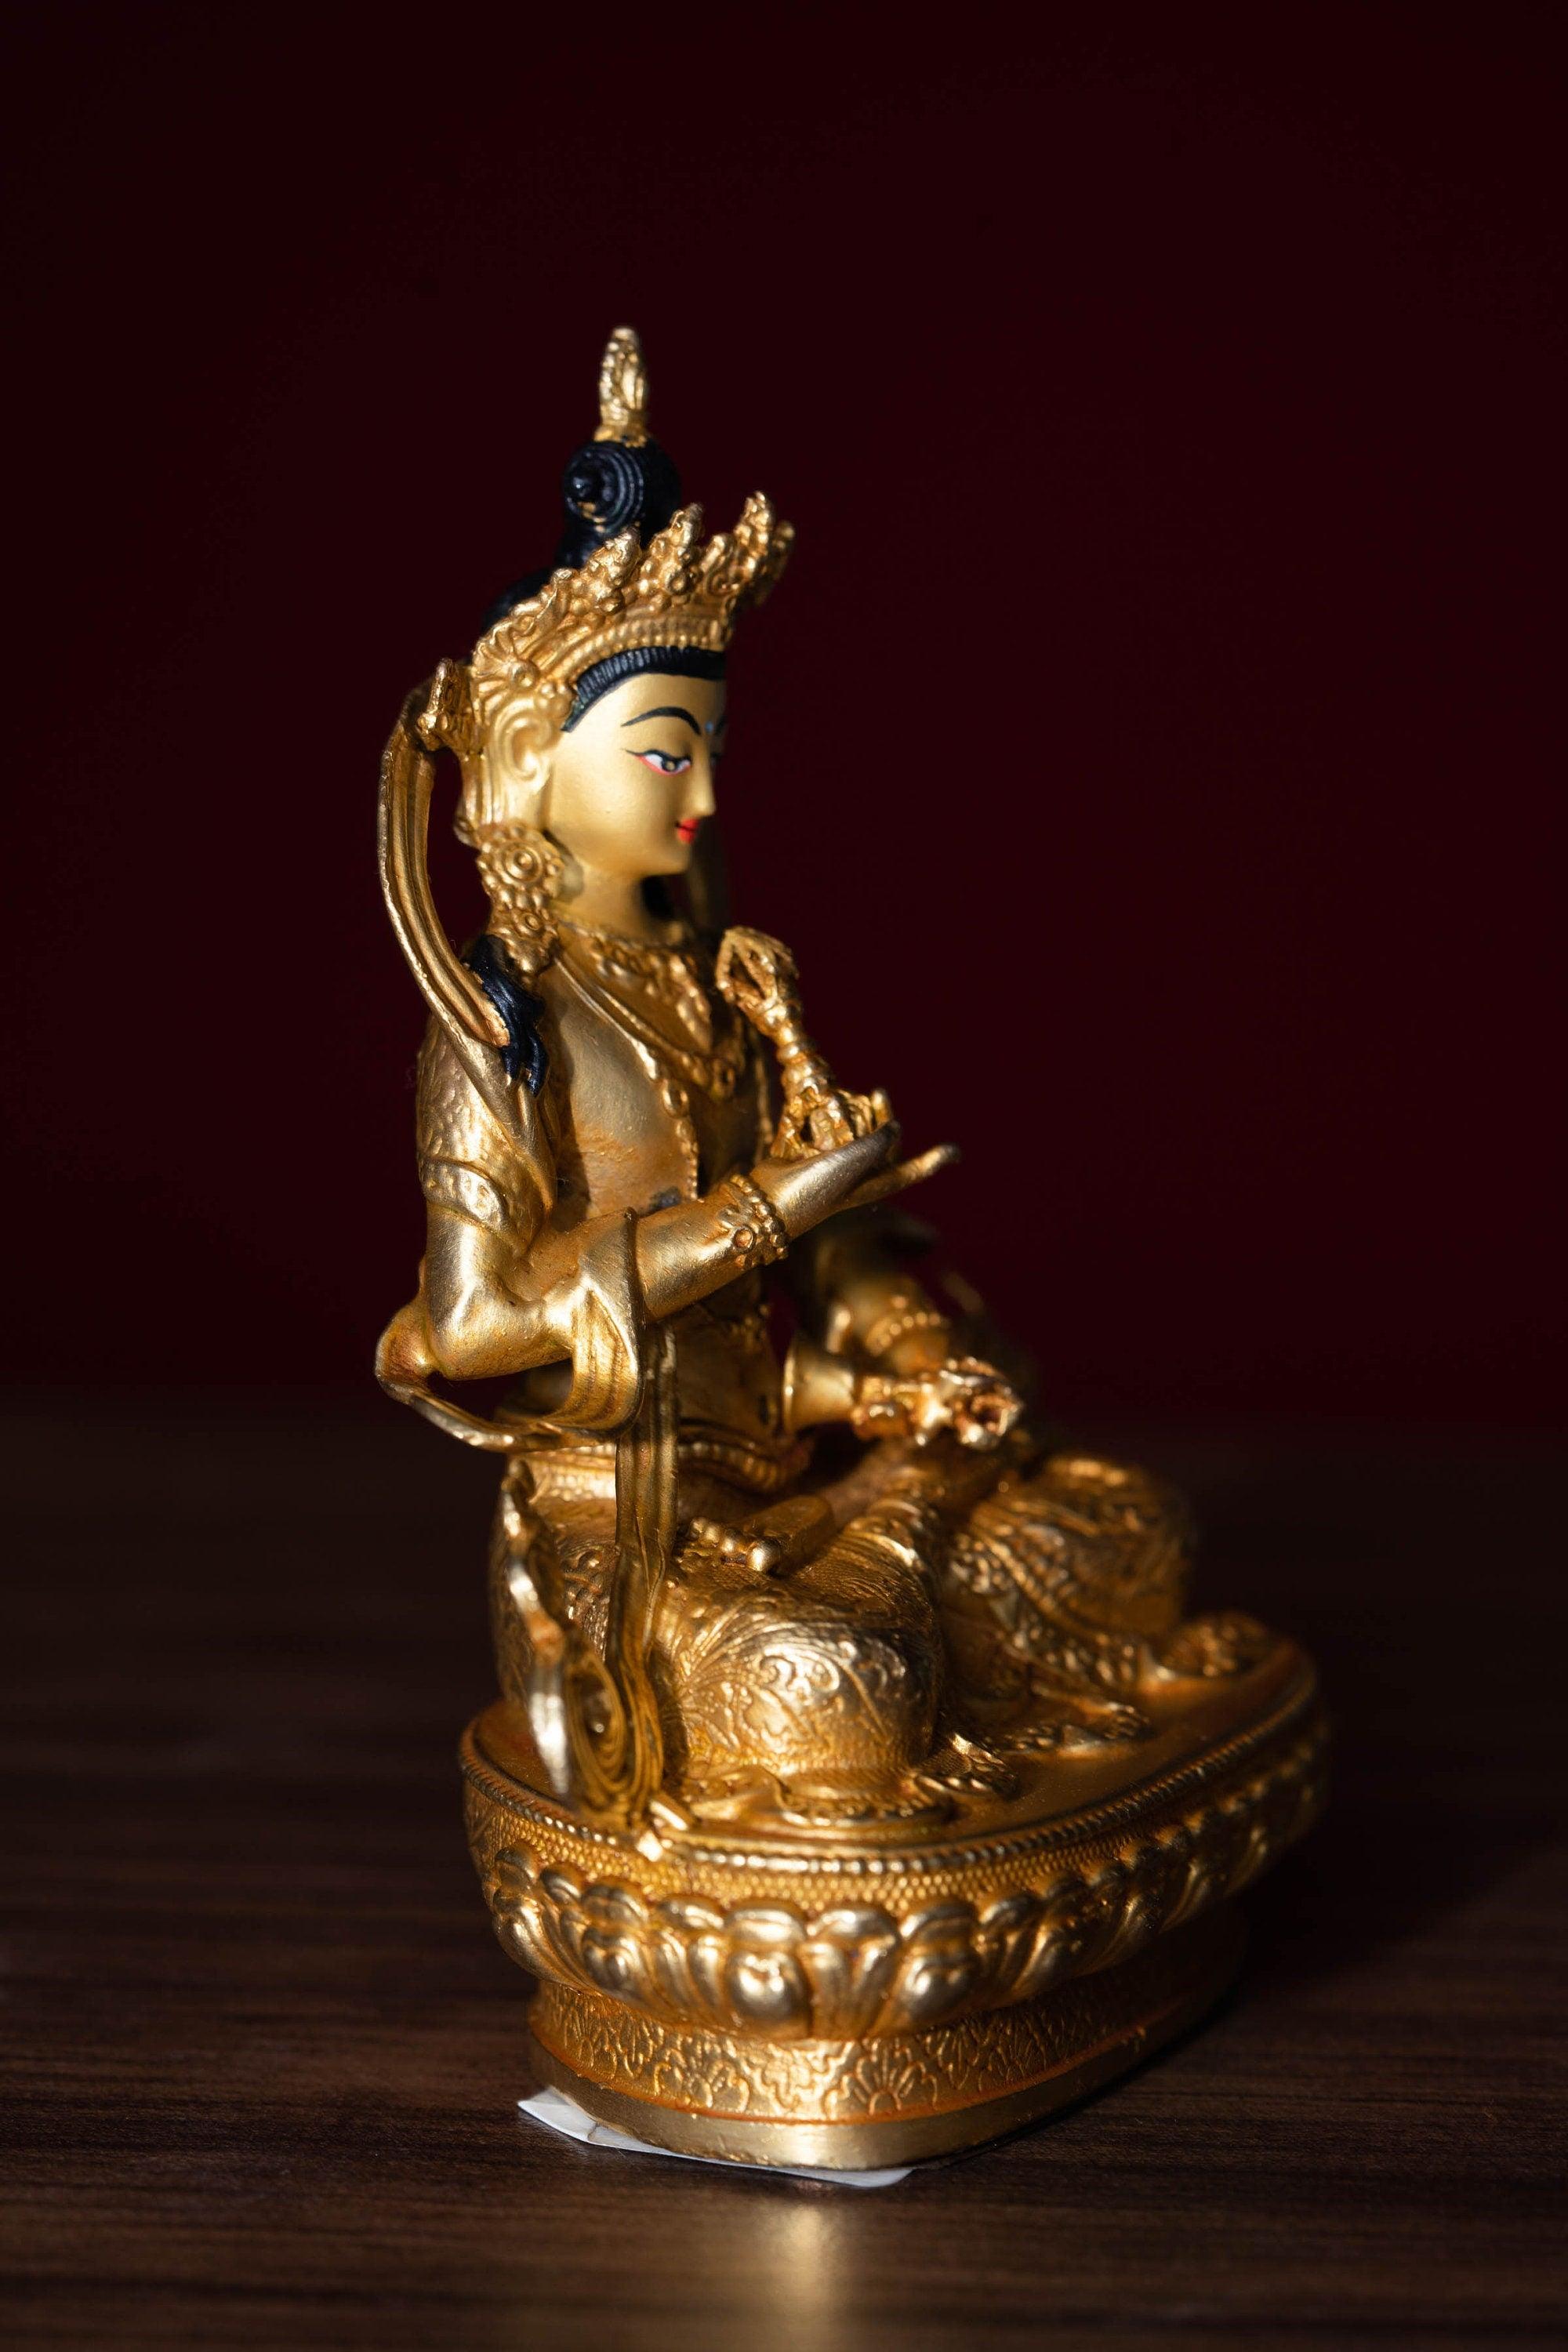 Vajrasattva holds the Vajra in his hand and seated on lotus. This is gold plated small size statue of Buddhist deity